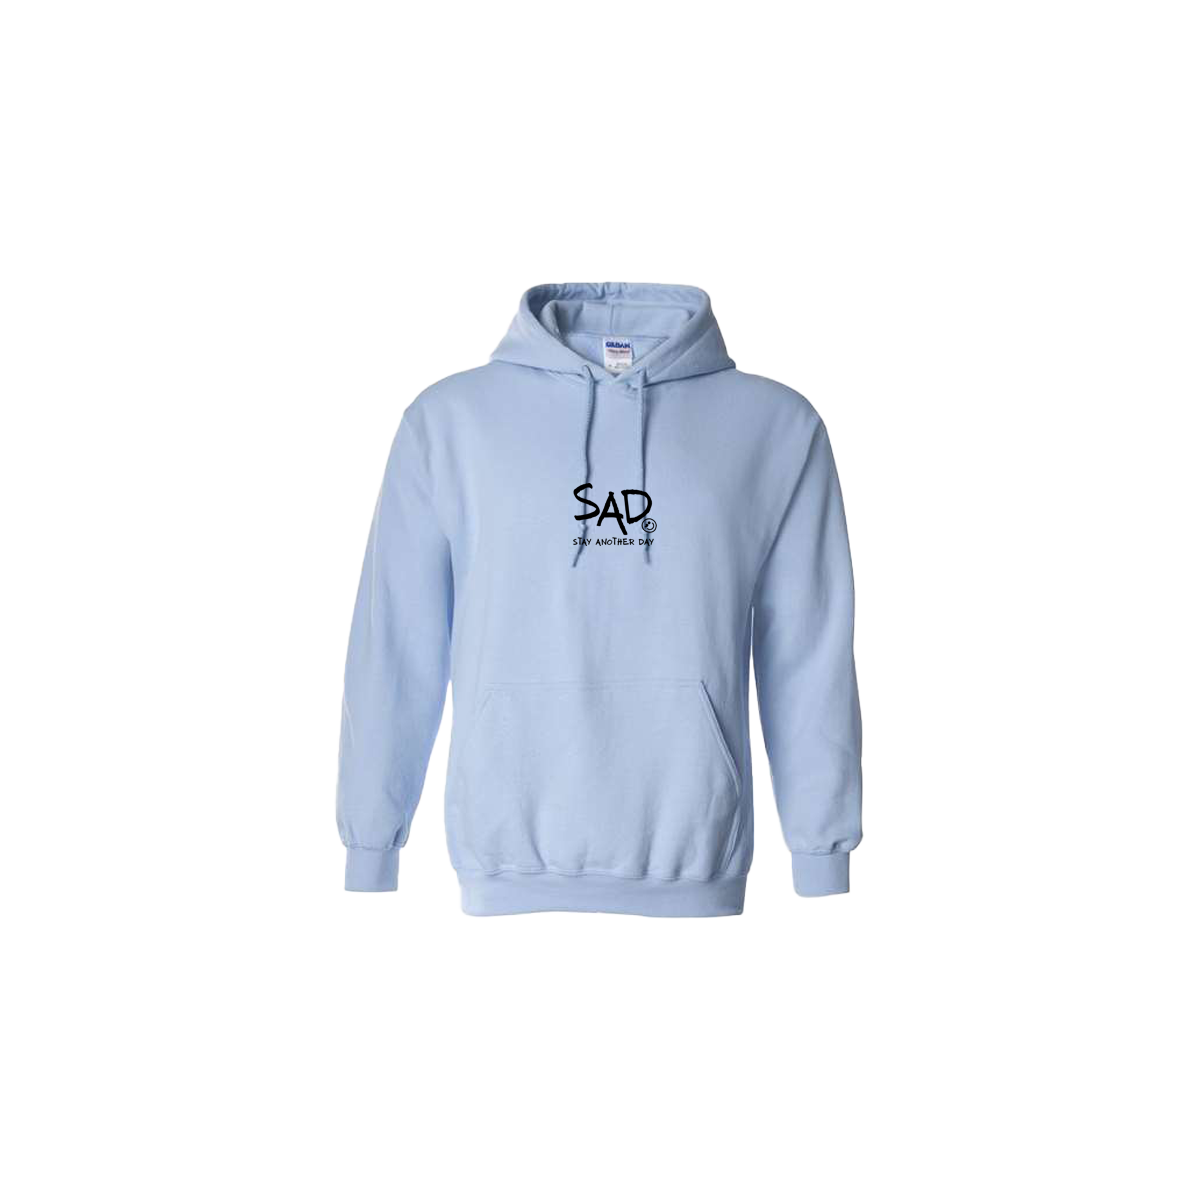 Stay Another Day - SAD Logo Embroidered Light Blue Hoodie - Mental Health Awareness Clothing